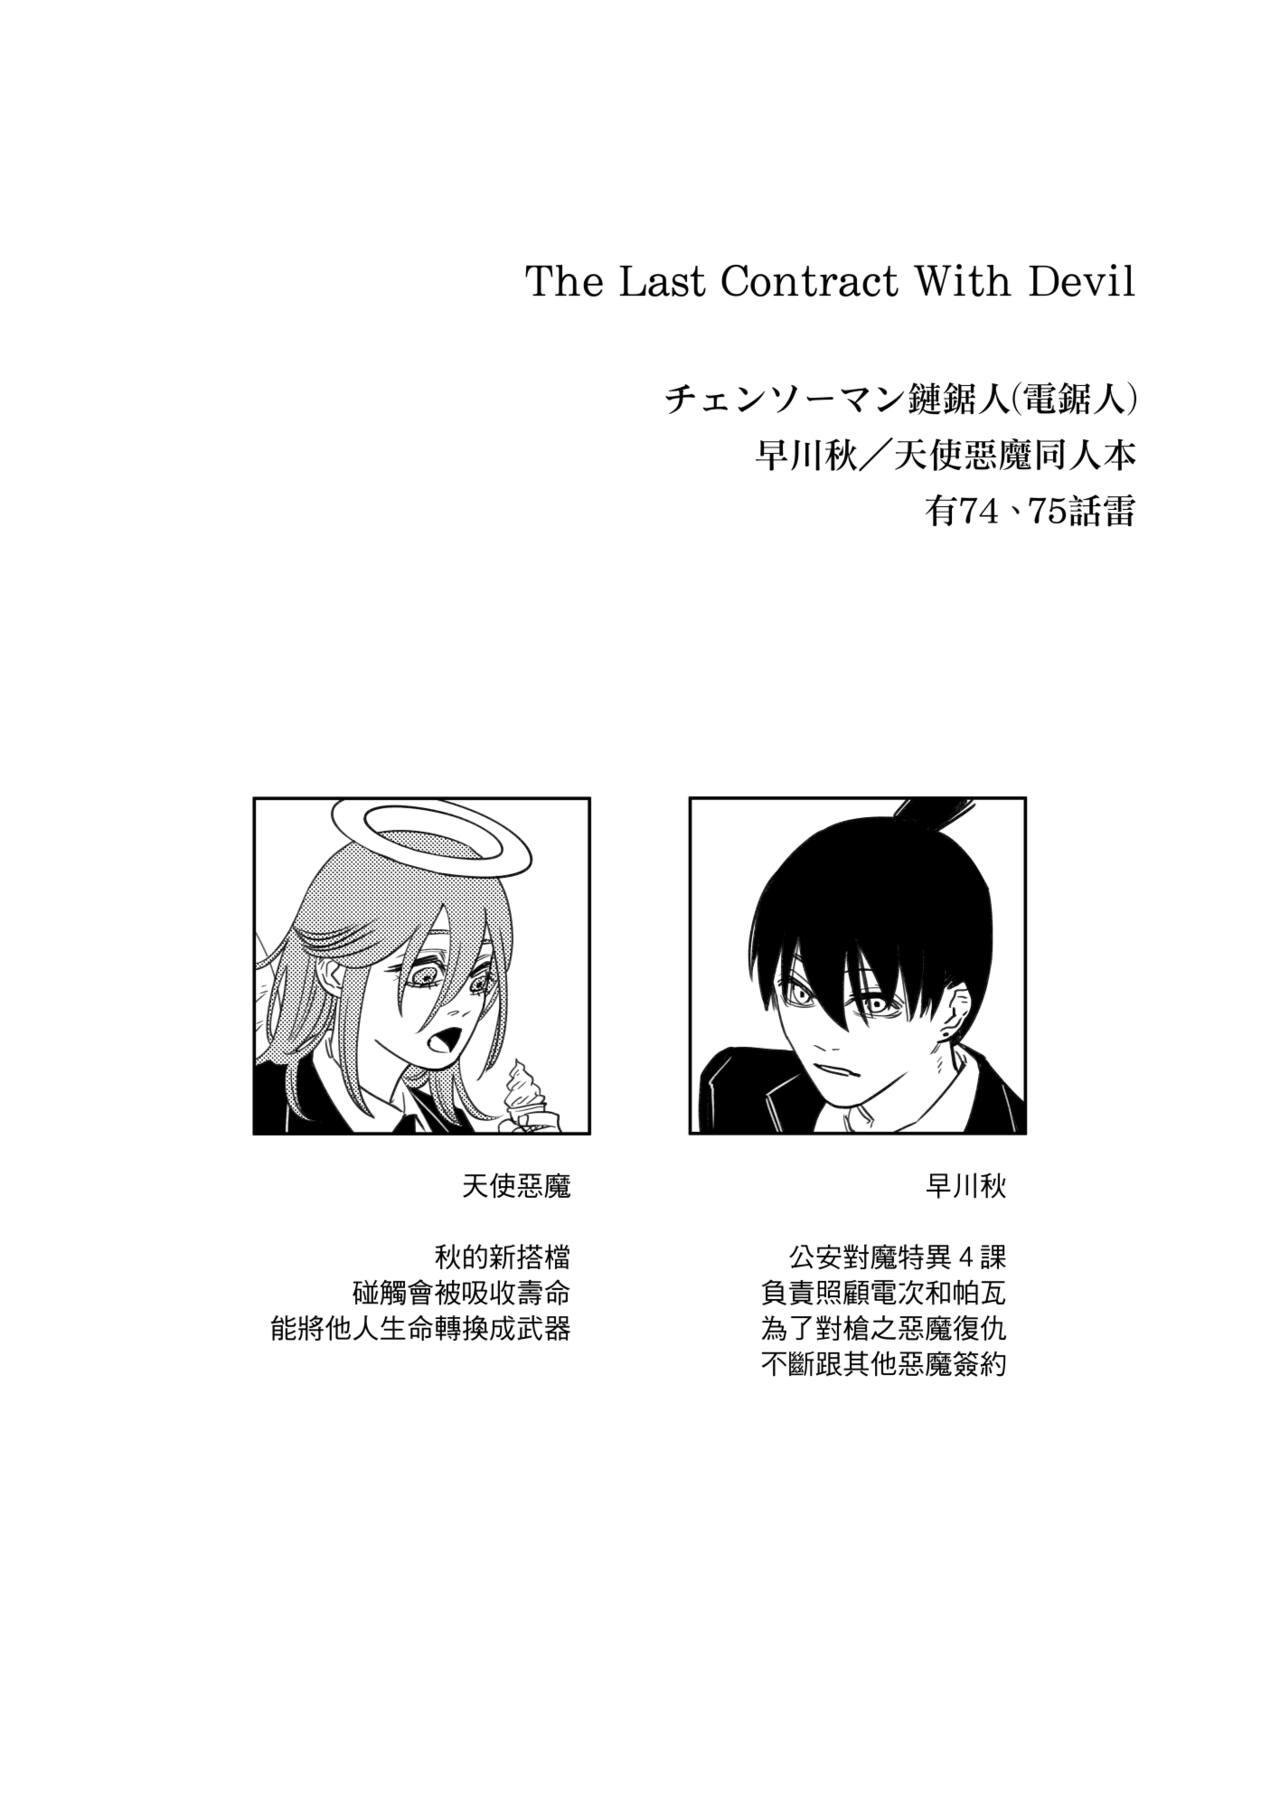 Selfie The Last Contract With Devil - Chainsaw man Gang Bang - Page 3